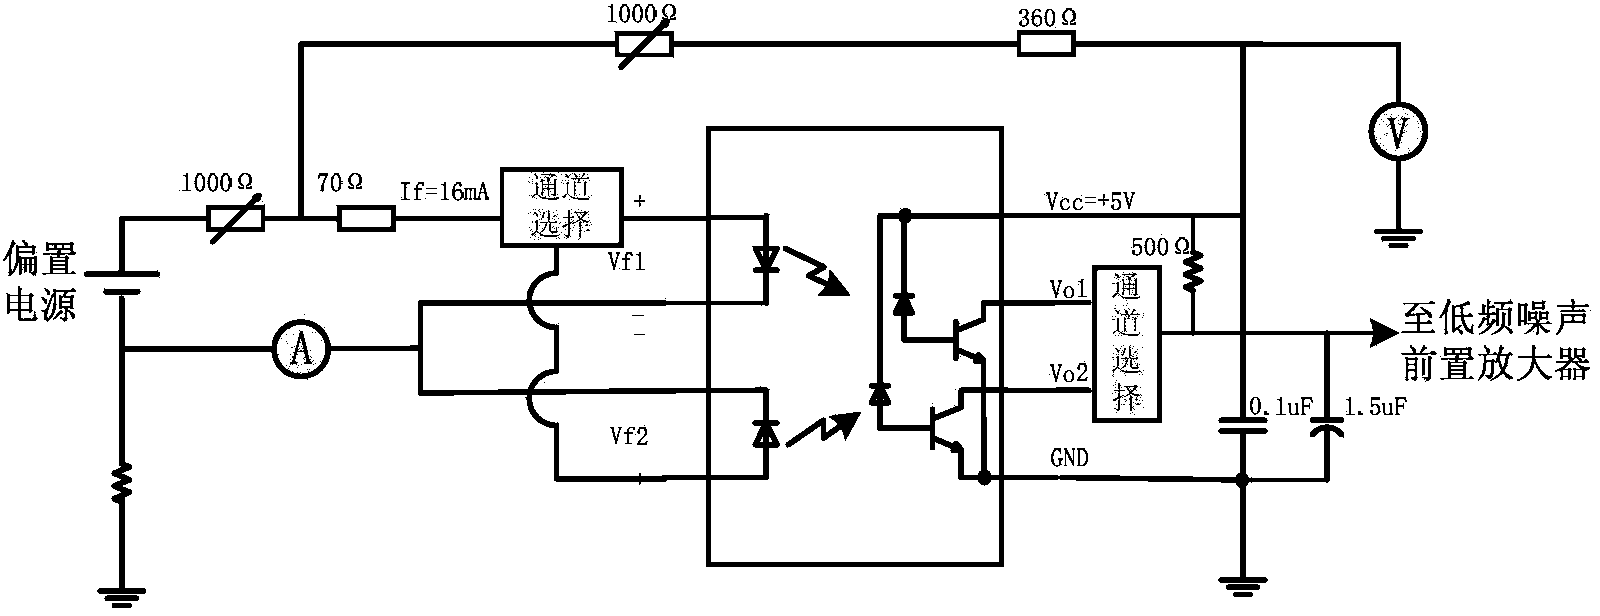 Method for evaluating opto-coupler storage life based on low-frequency noise classification